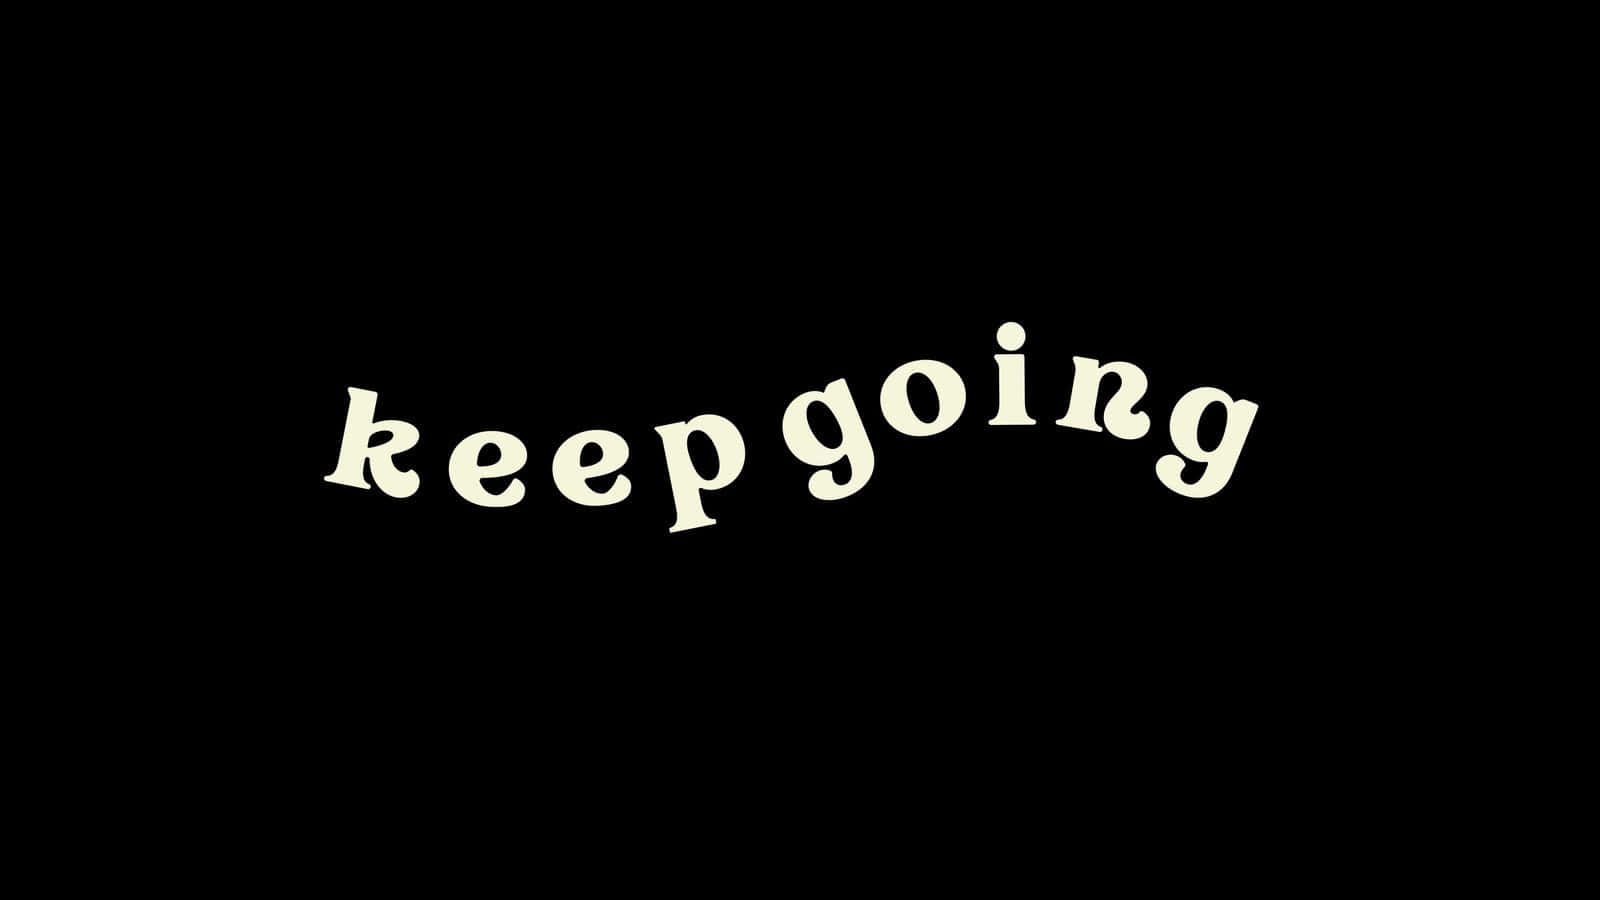 "Never Give Up - Keep Going" Wallpaper